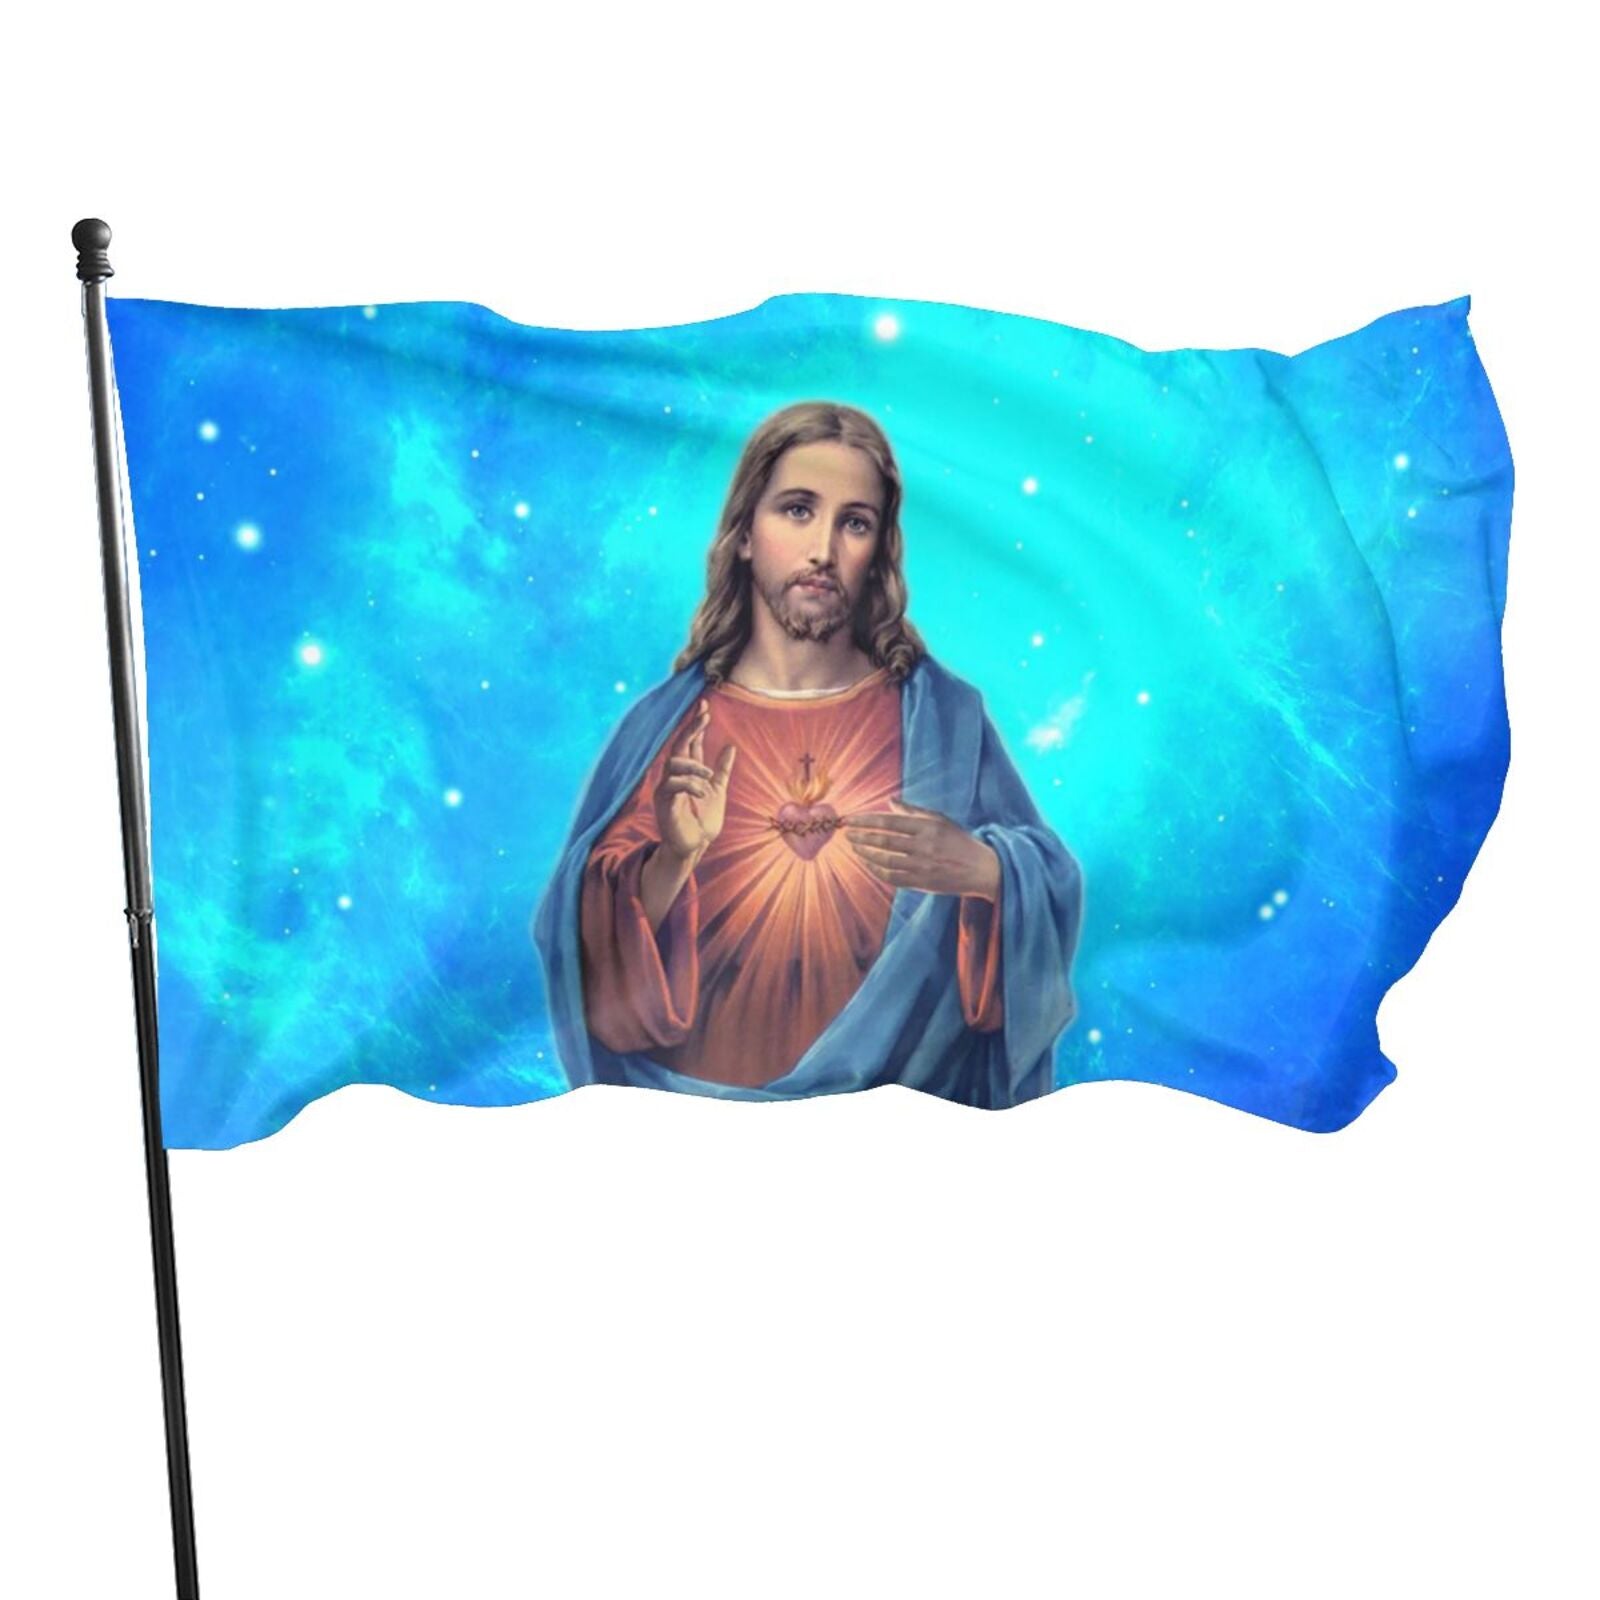 Christianartbag Flag Decor, Christianity JESUS Flag Home Room Dormitory Decoration Outdoor Decor Polyester Banners and Flags Brass Grommets Women Men Gift - Christian Art Bag